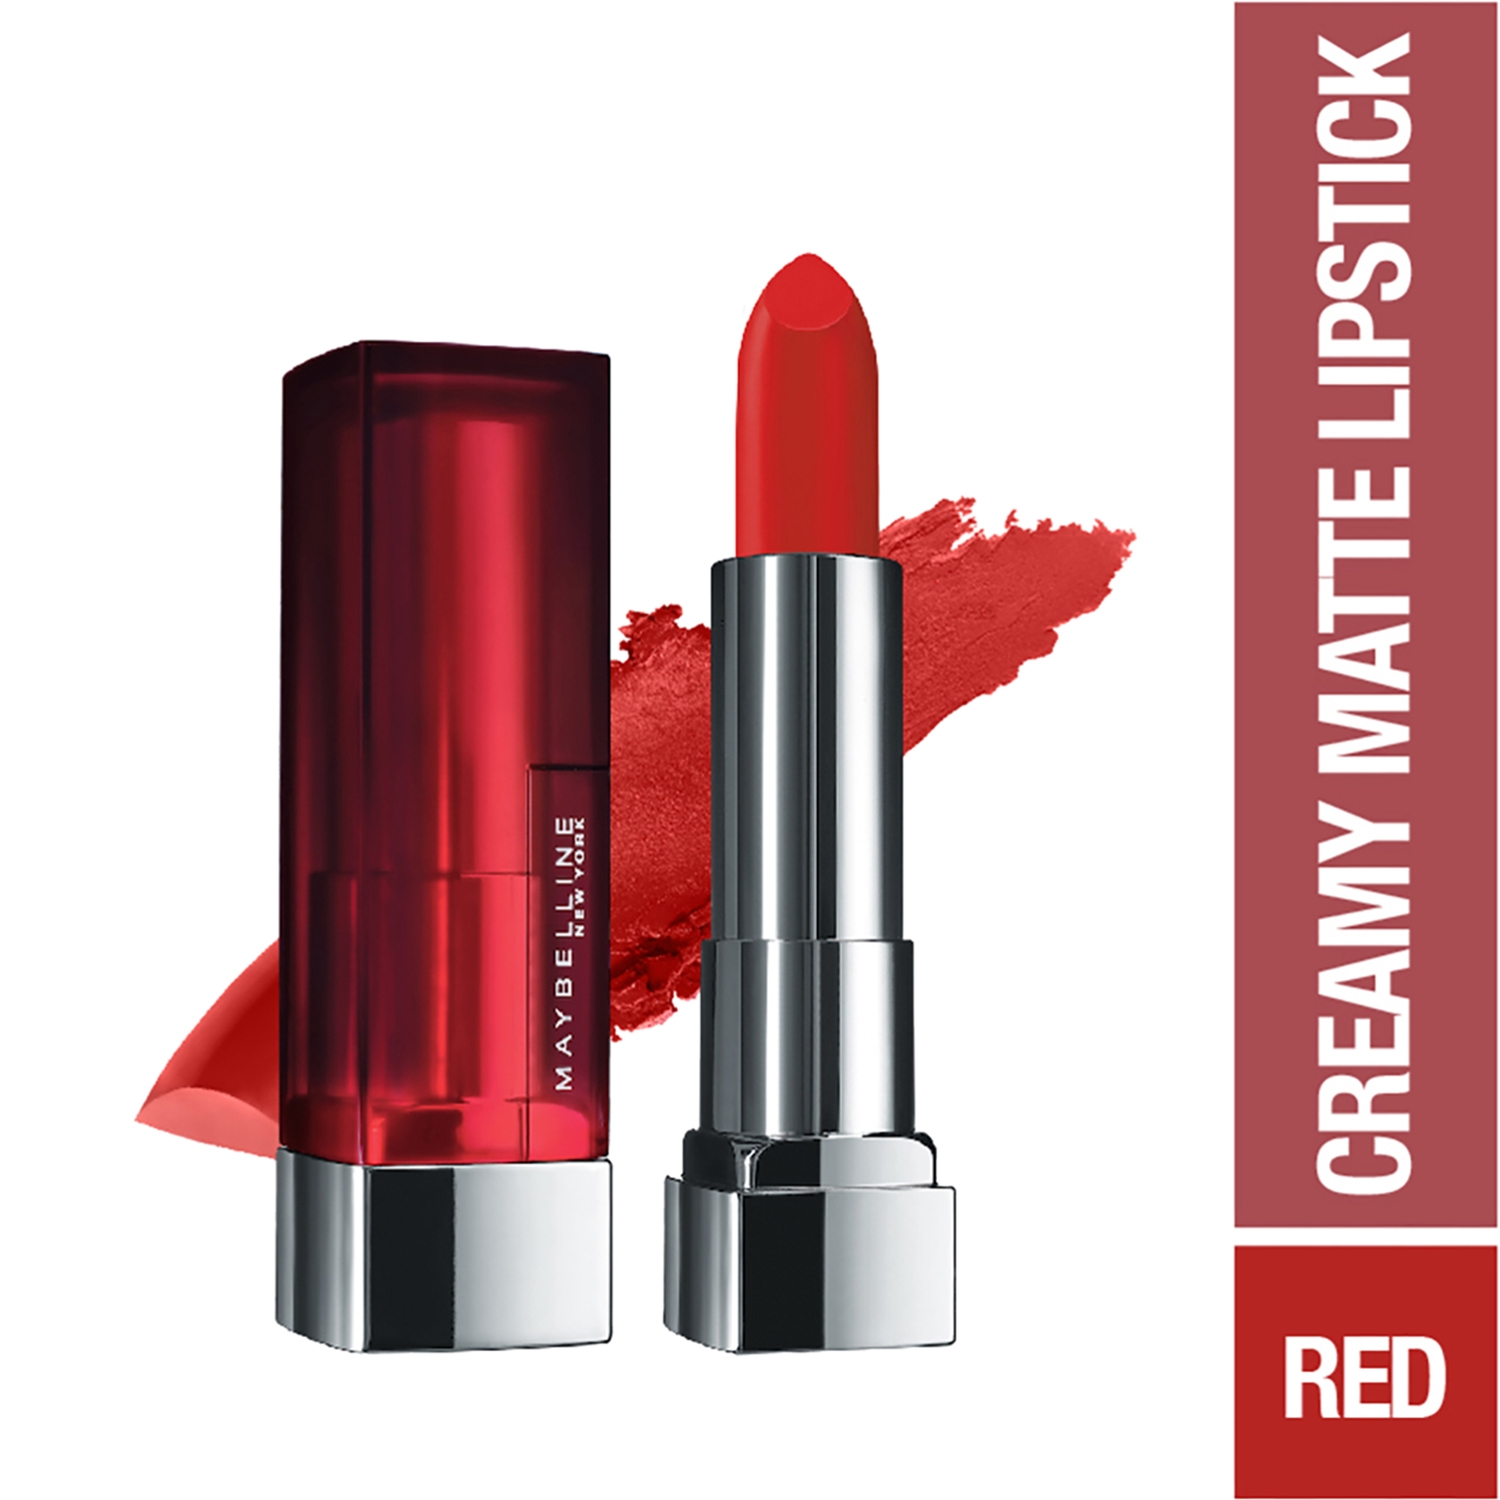 Maybelline New York | Maybelline New York Color Sensational Creamy Matte Lipstick - 685 Craving Coral (3.9g)